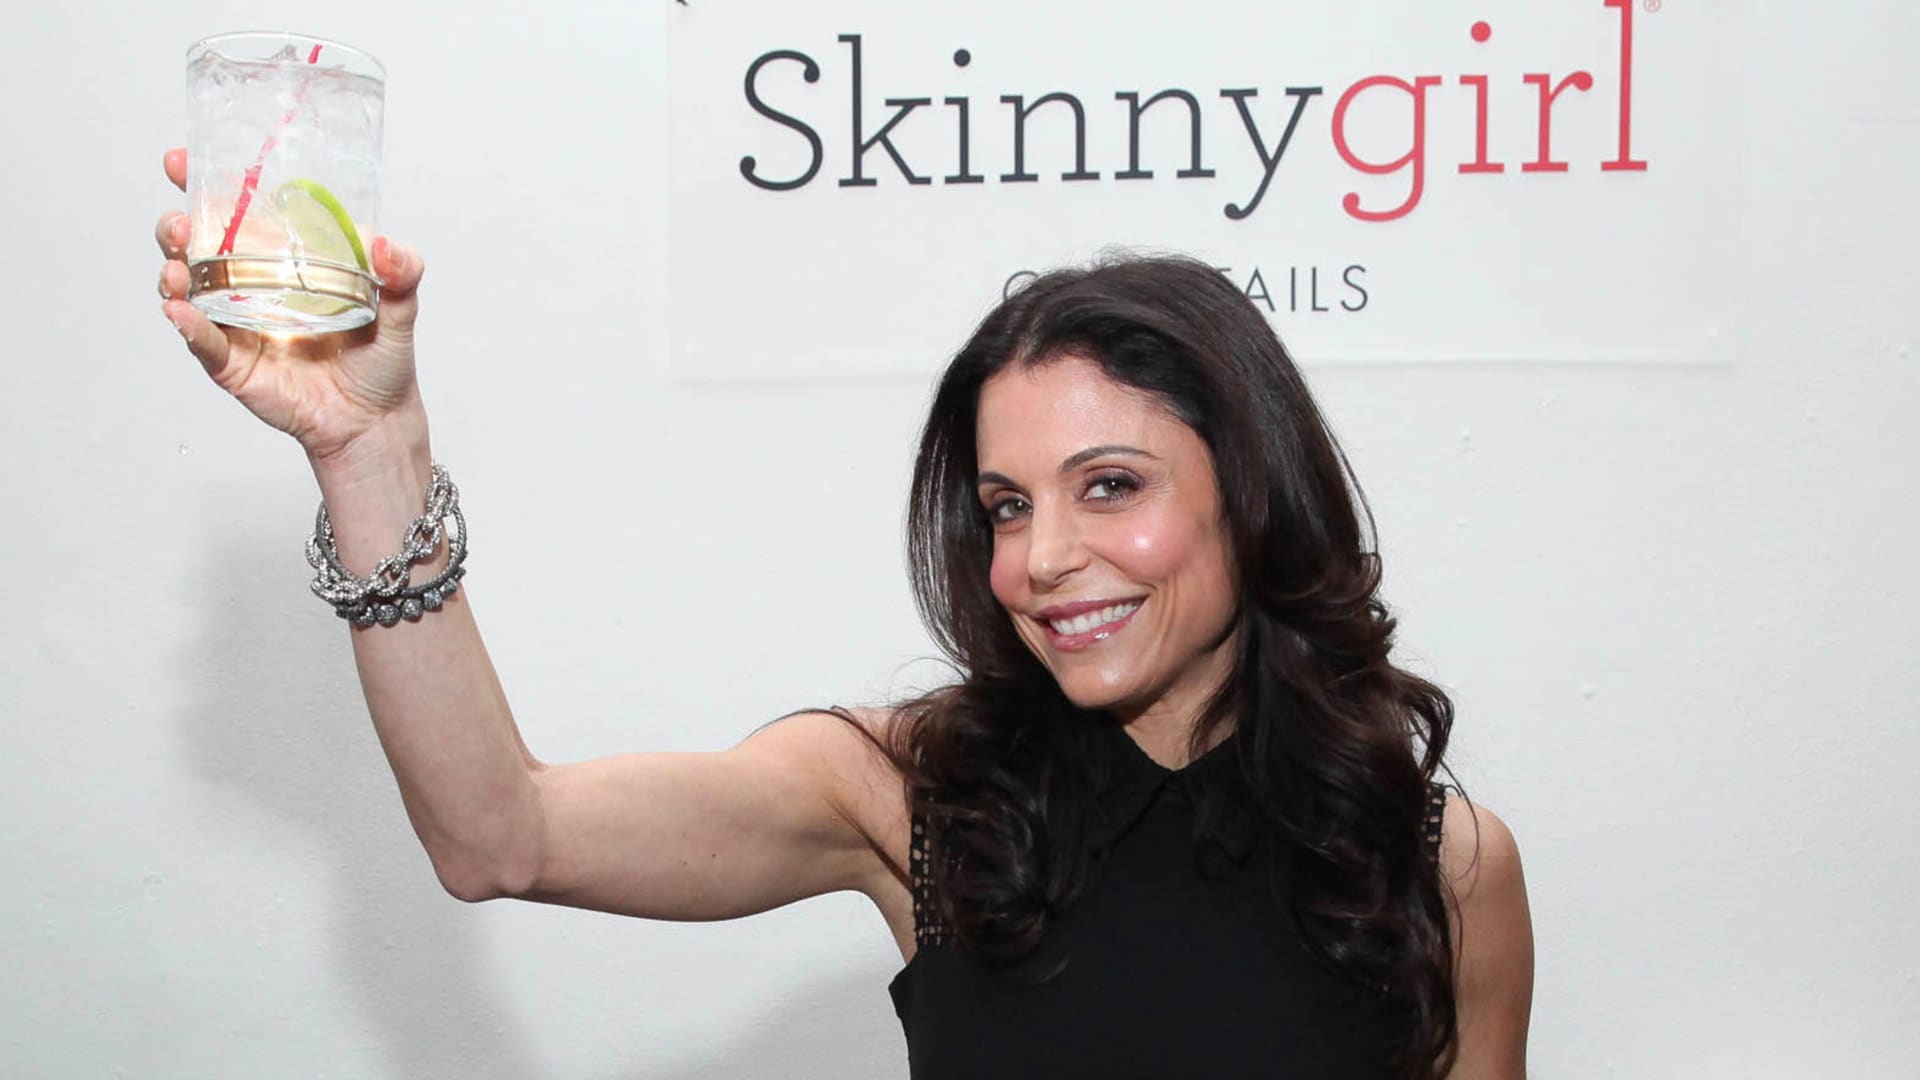 Self-made millionaire Bethenny Frankel: The most successful people have an ‘unstoppable nature’ that separates them from others